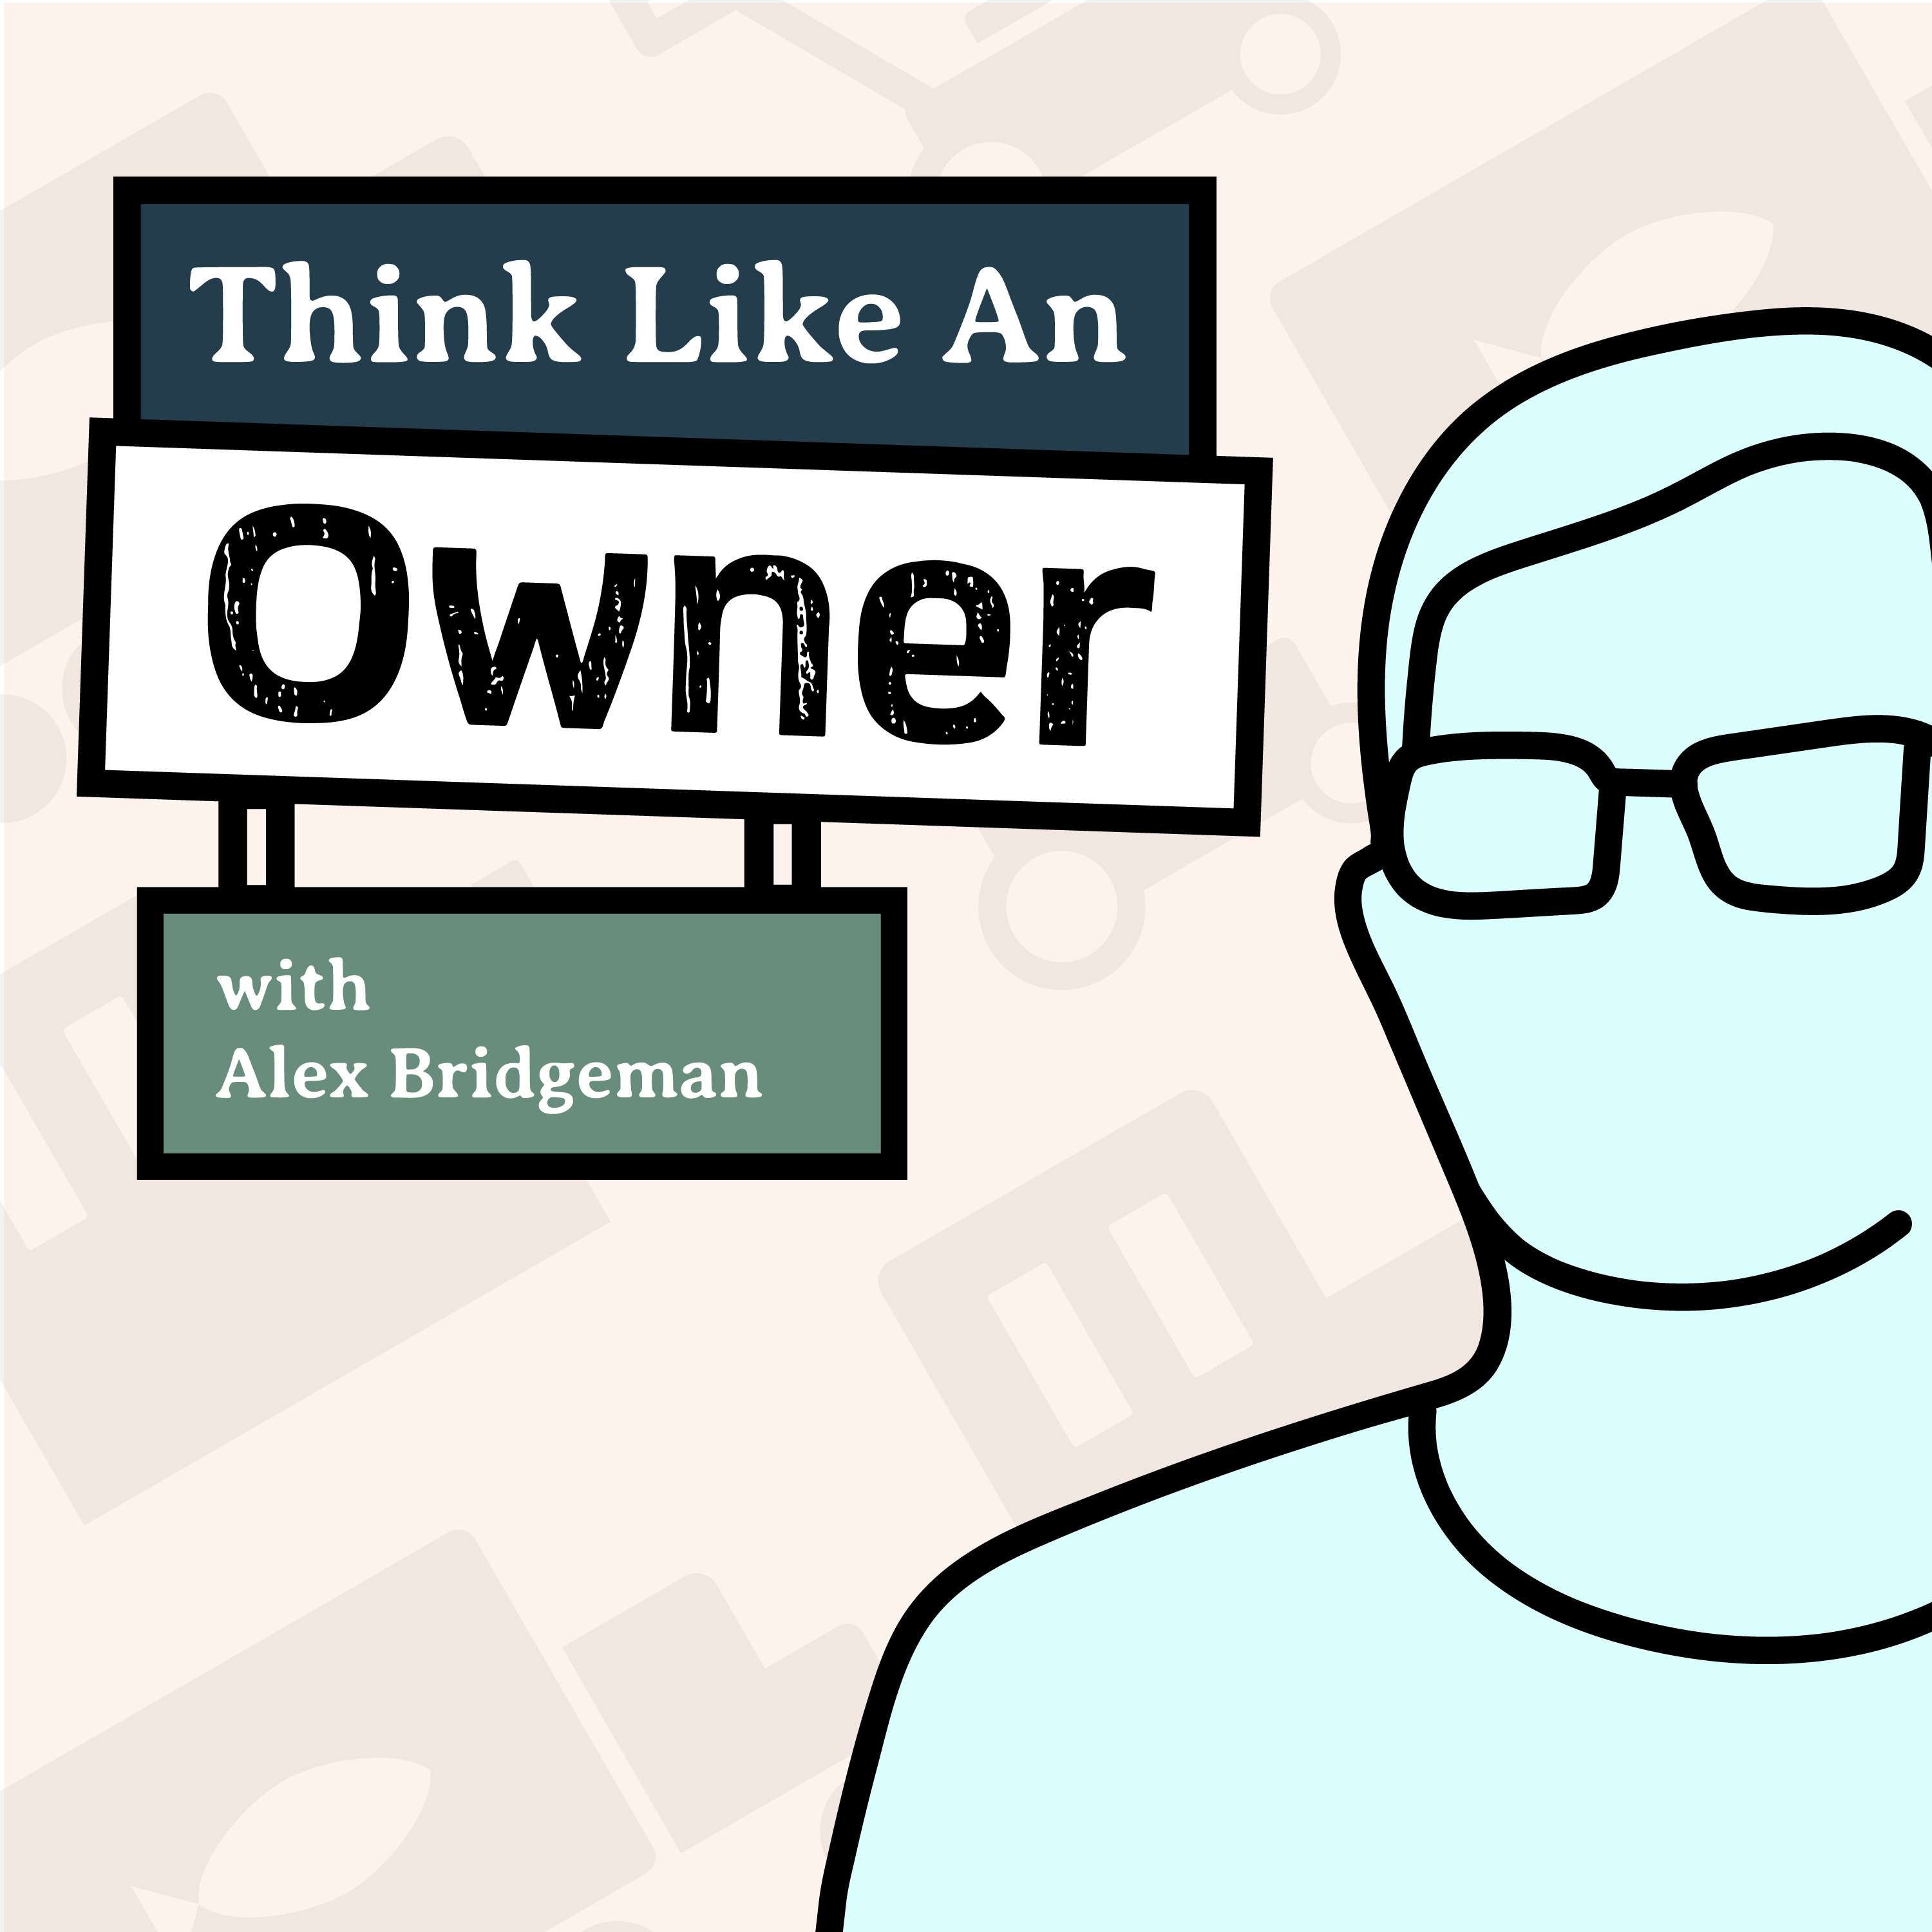 [Think Like An Owner] Badge Stone – Earning His Badge and Making His Mark in Search Fund Investments